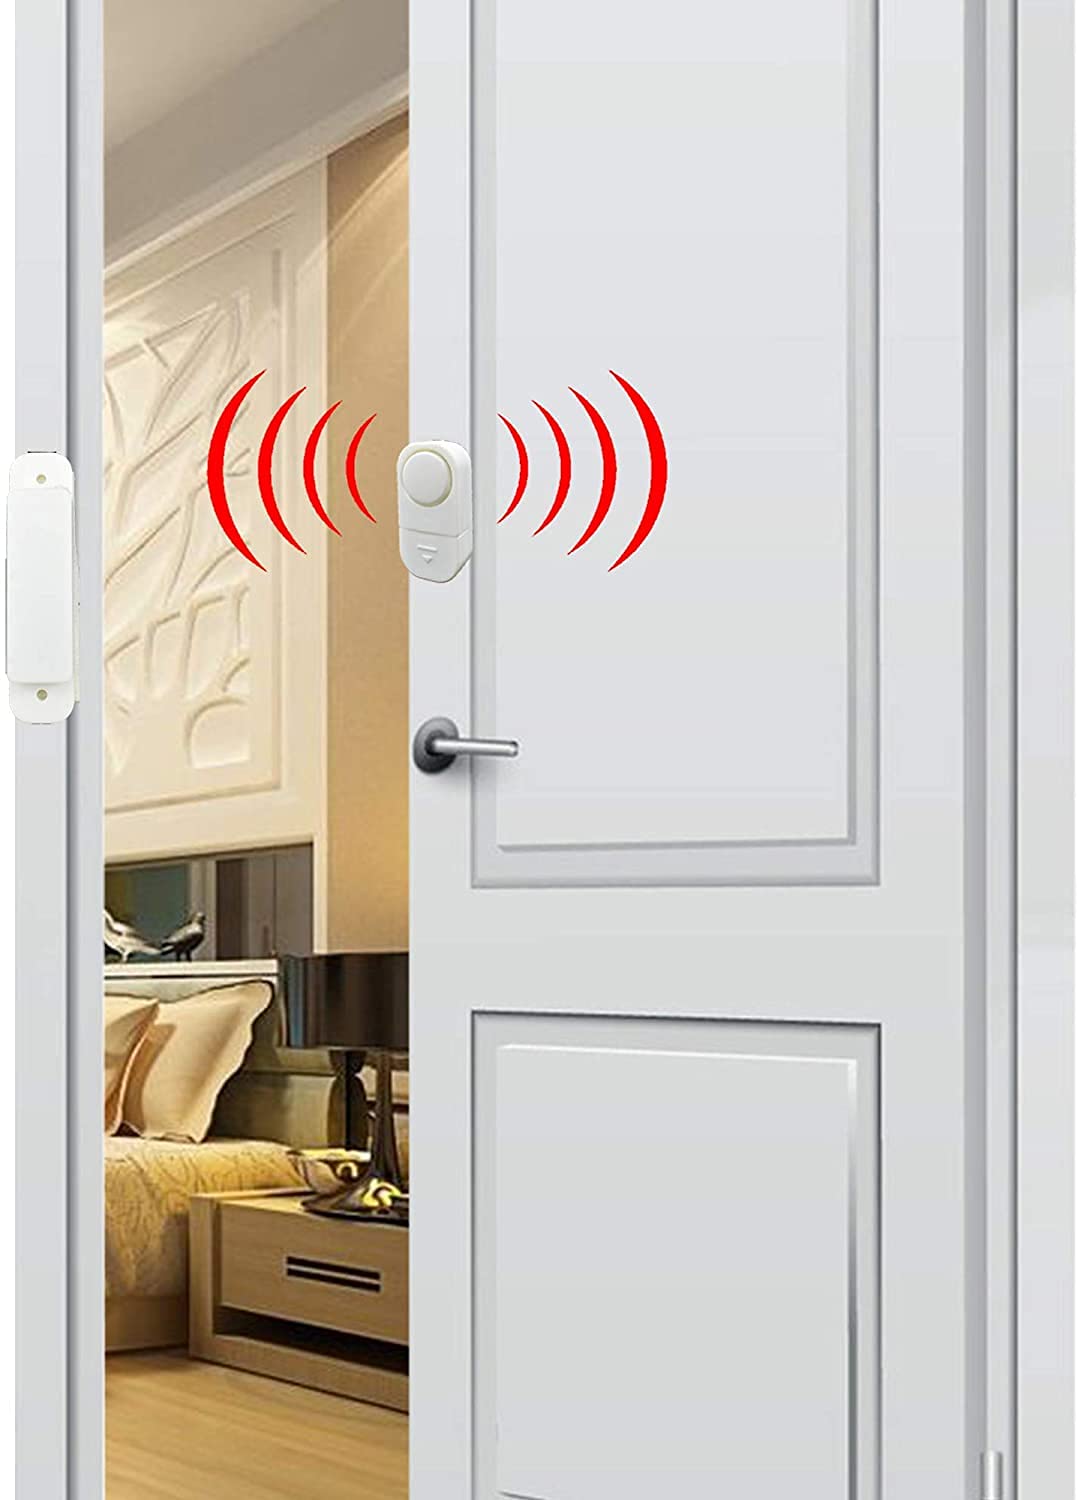 4 Pack Wireless Window Door Alarm Home Protection Against Burglar Wireless Chime Alarms - Loud Safe Door Alarms for Kids Safety, DIY for Home Security, Office Protection (White)